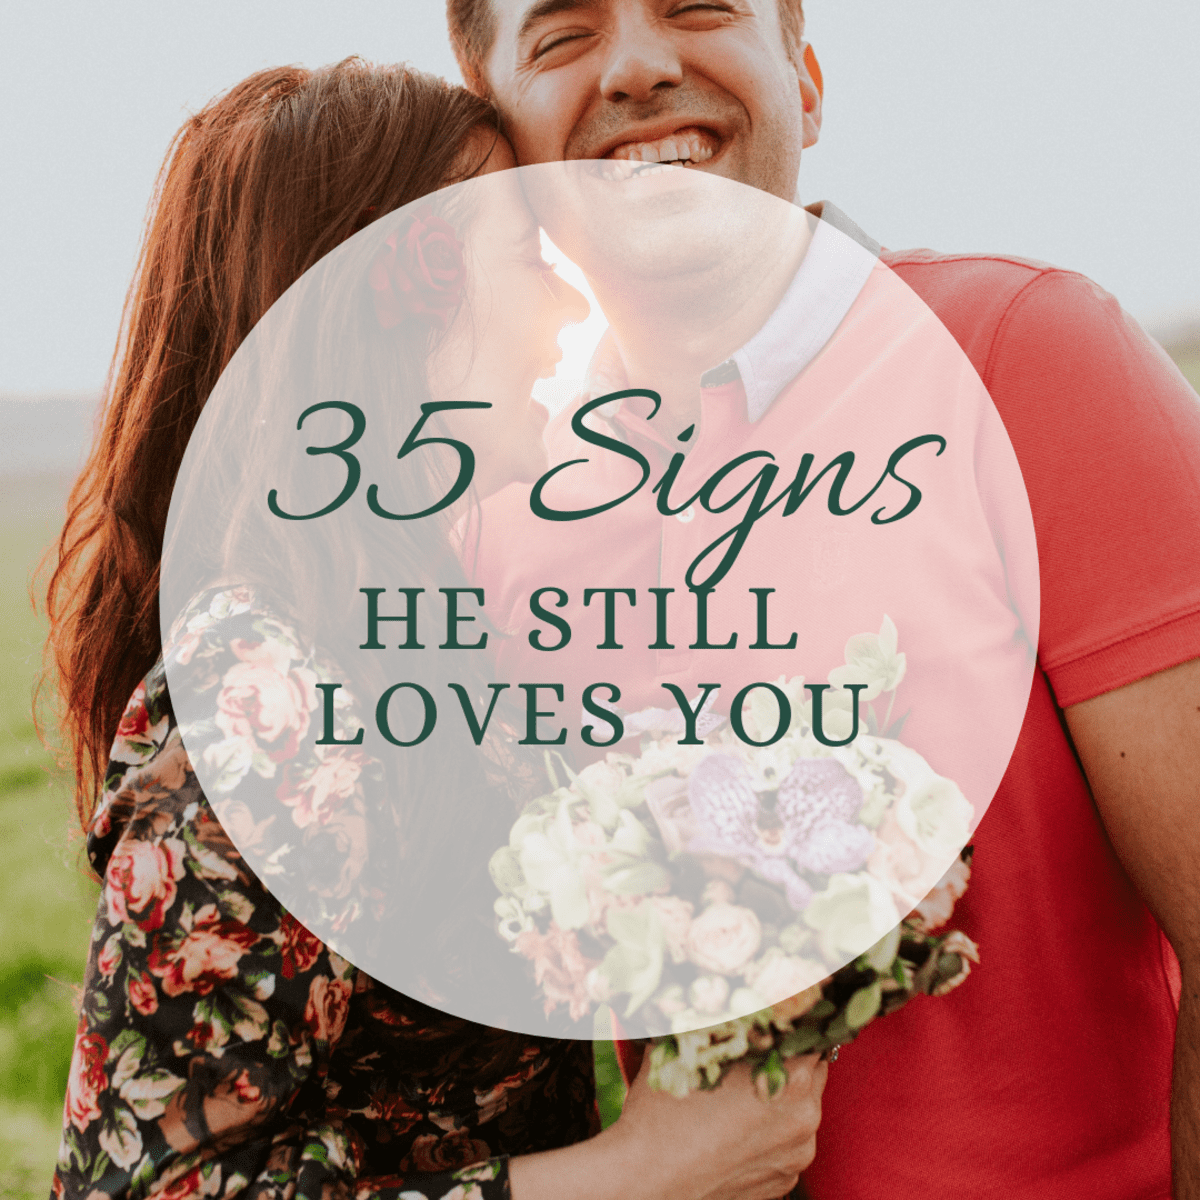 Signs that your husband still loves you